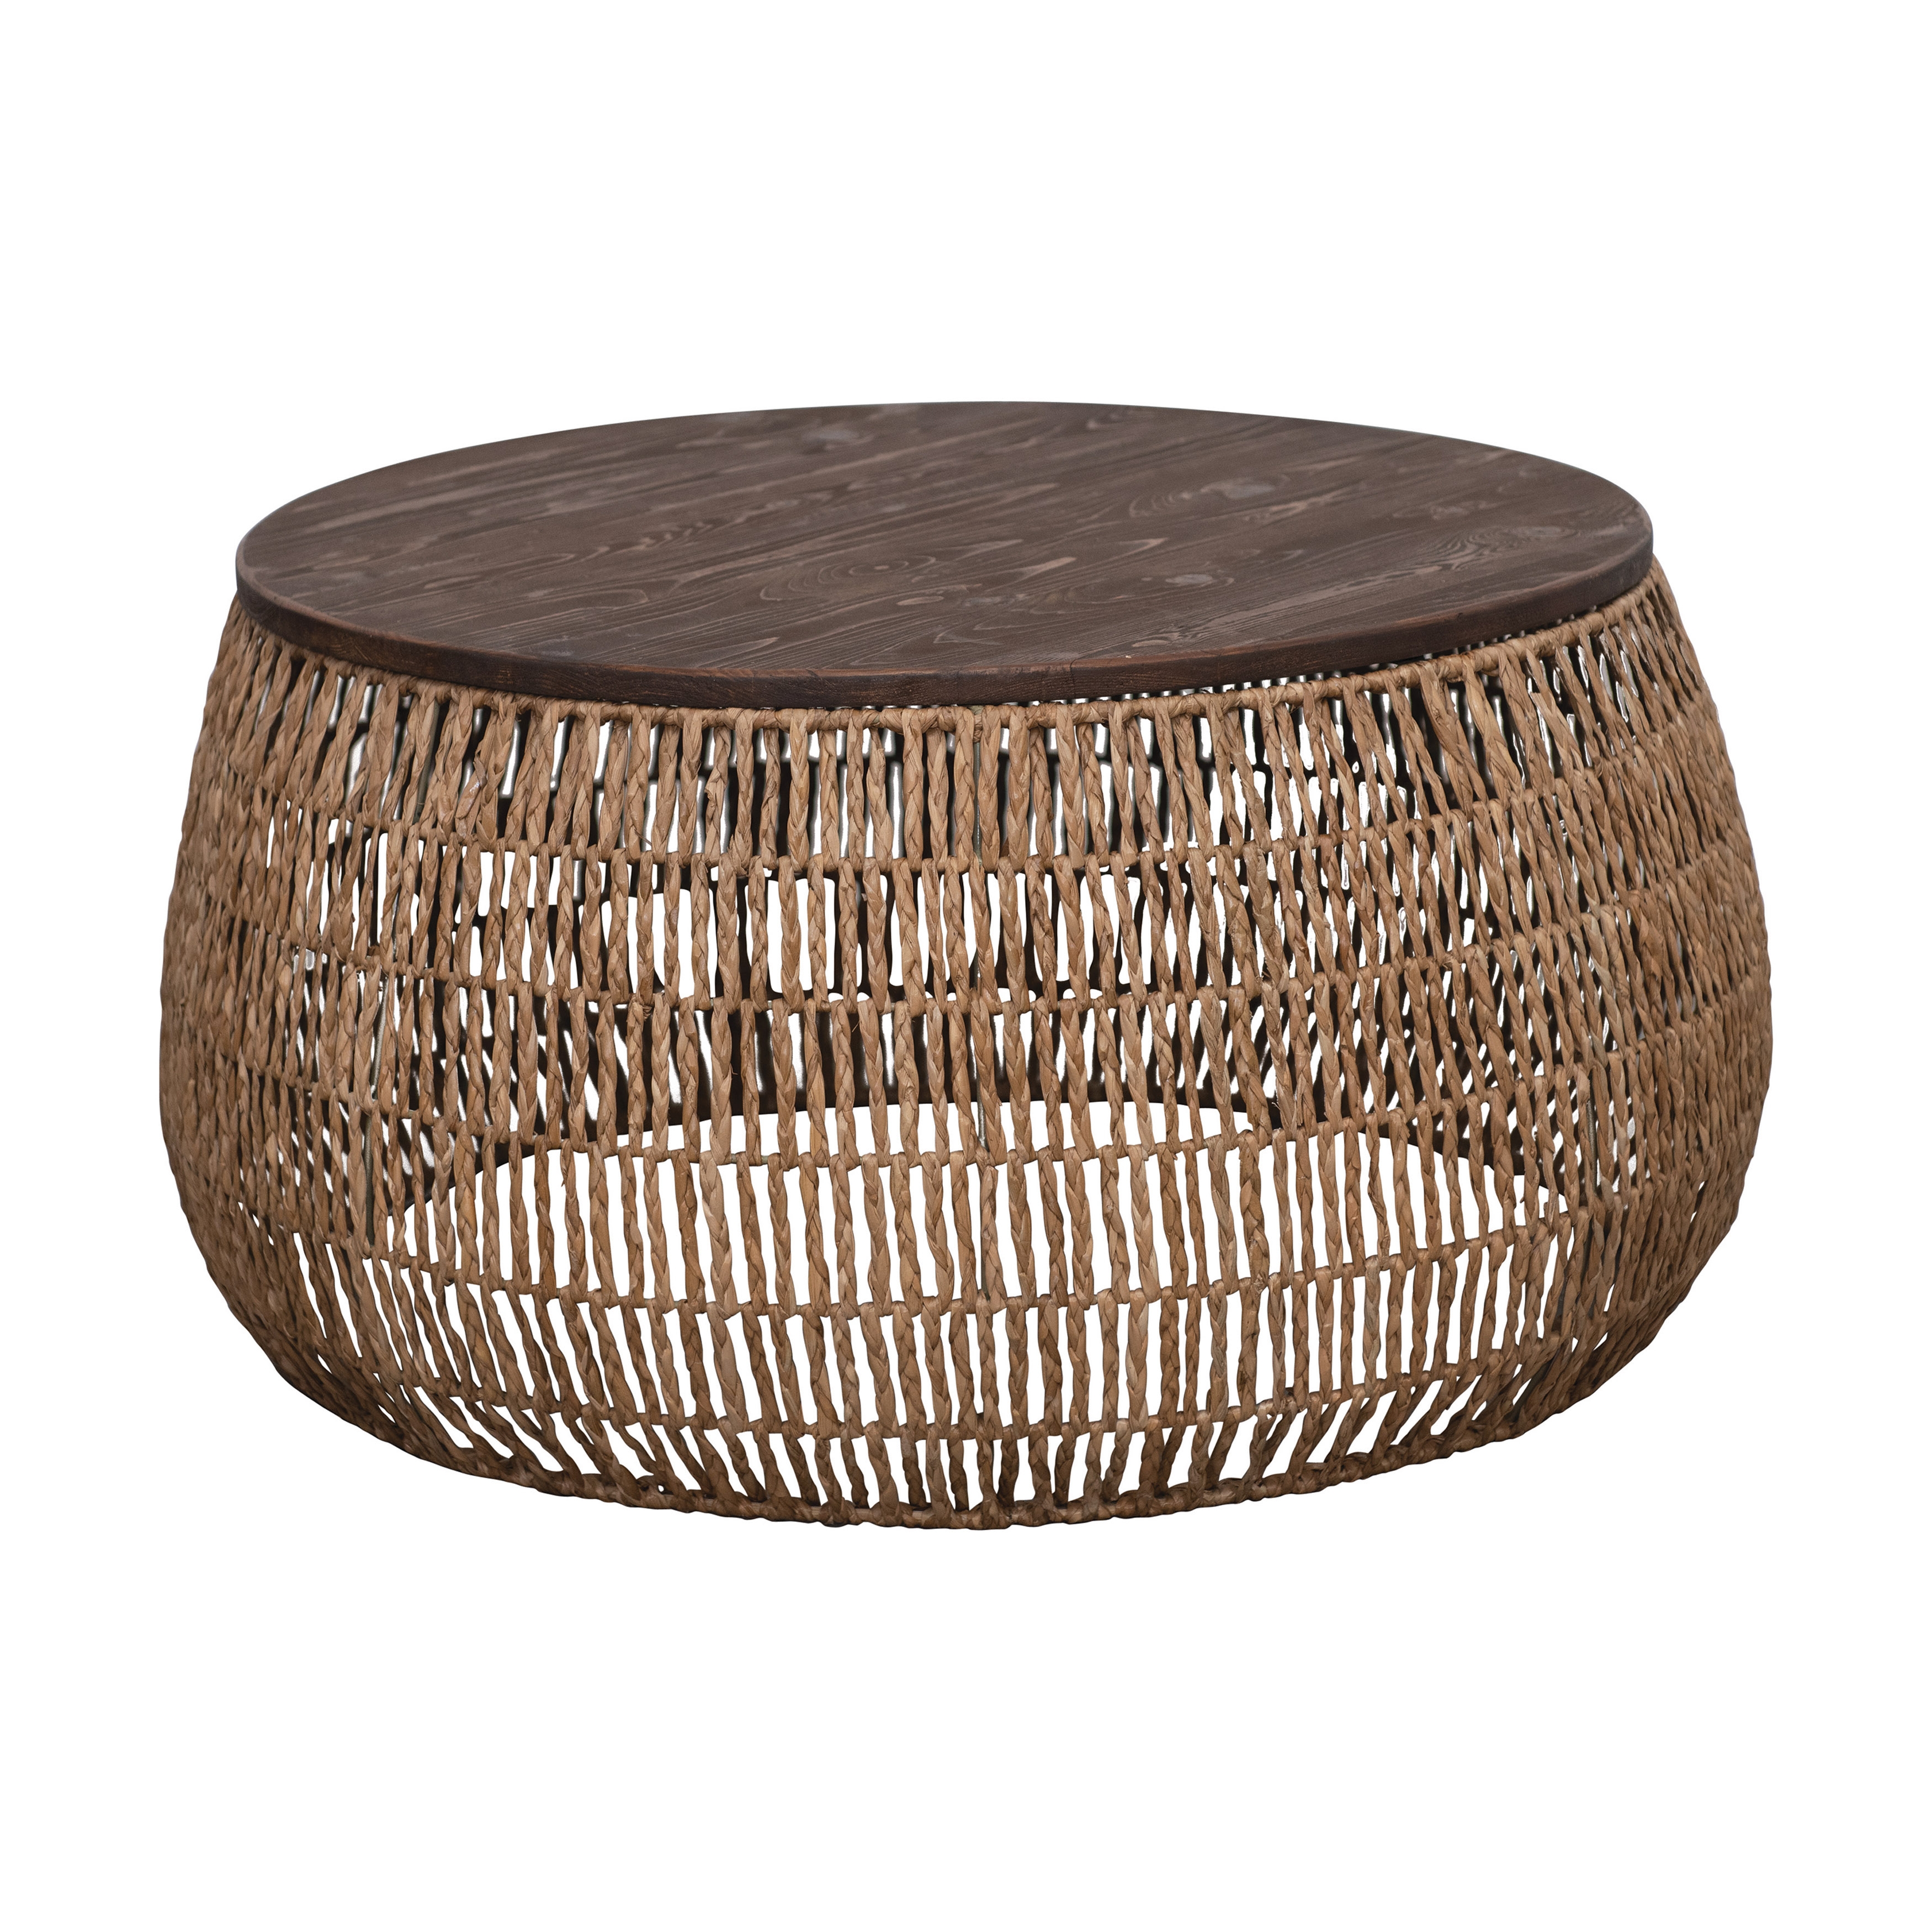 Hand-Woven Bankuan Side Table with Recycled Pine Wood Top - Image 0